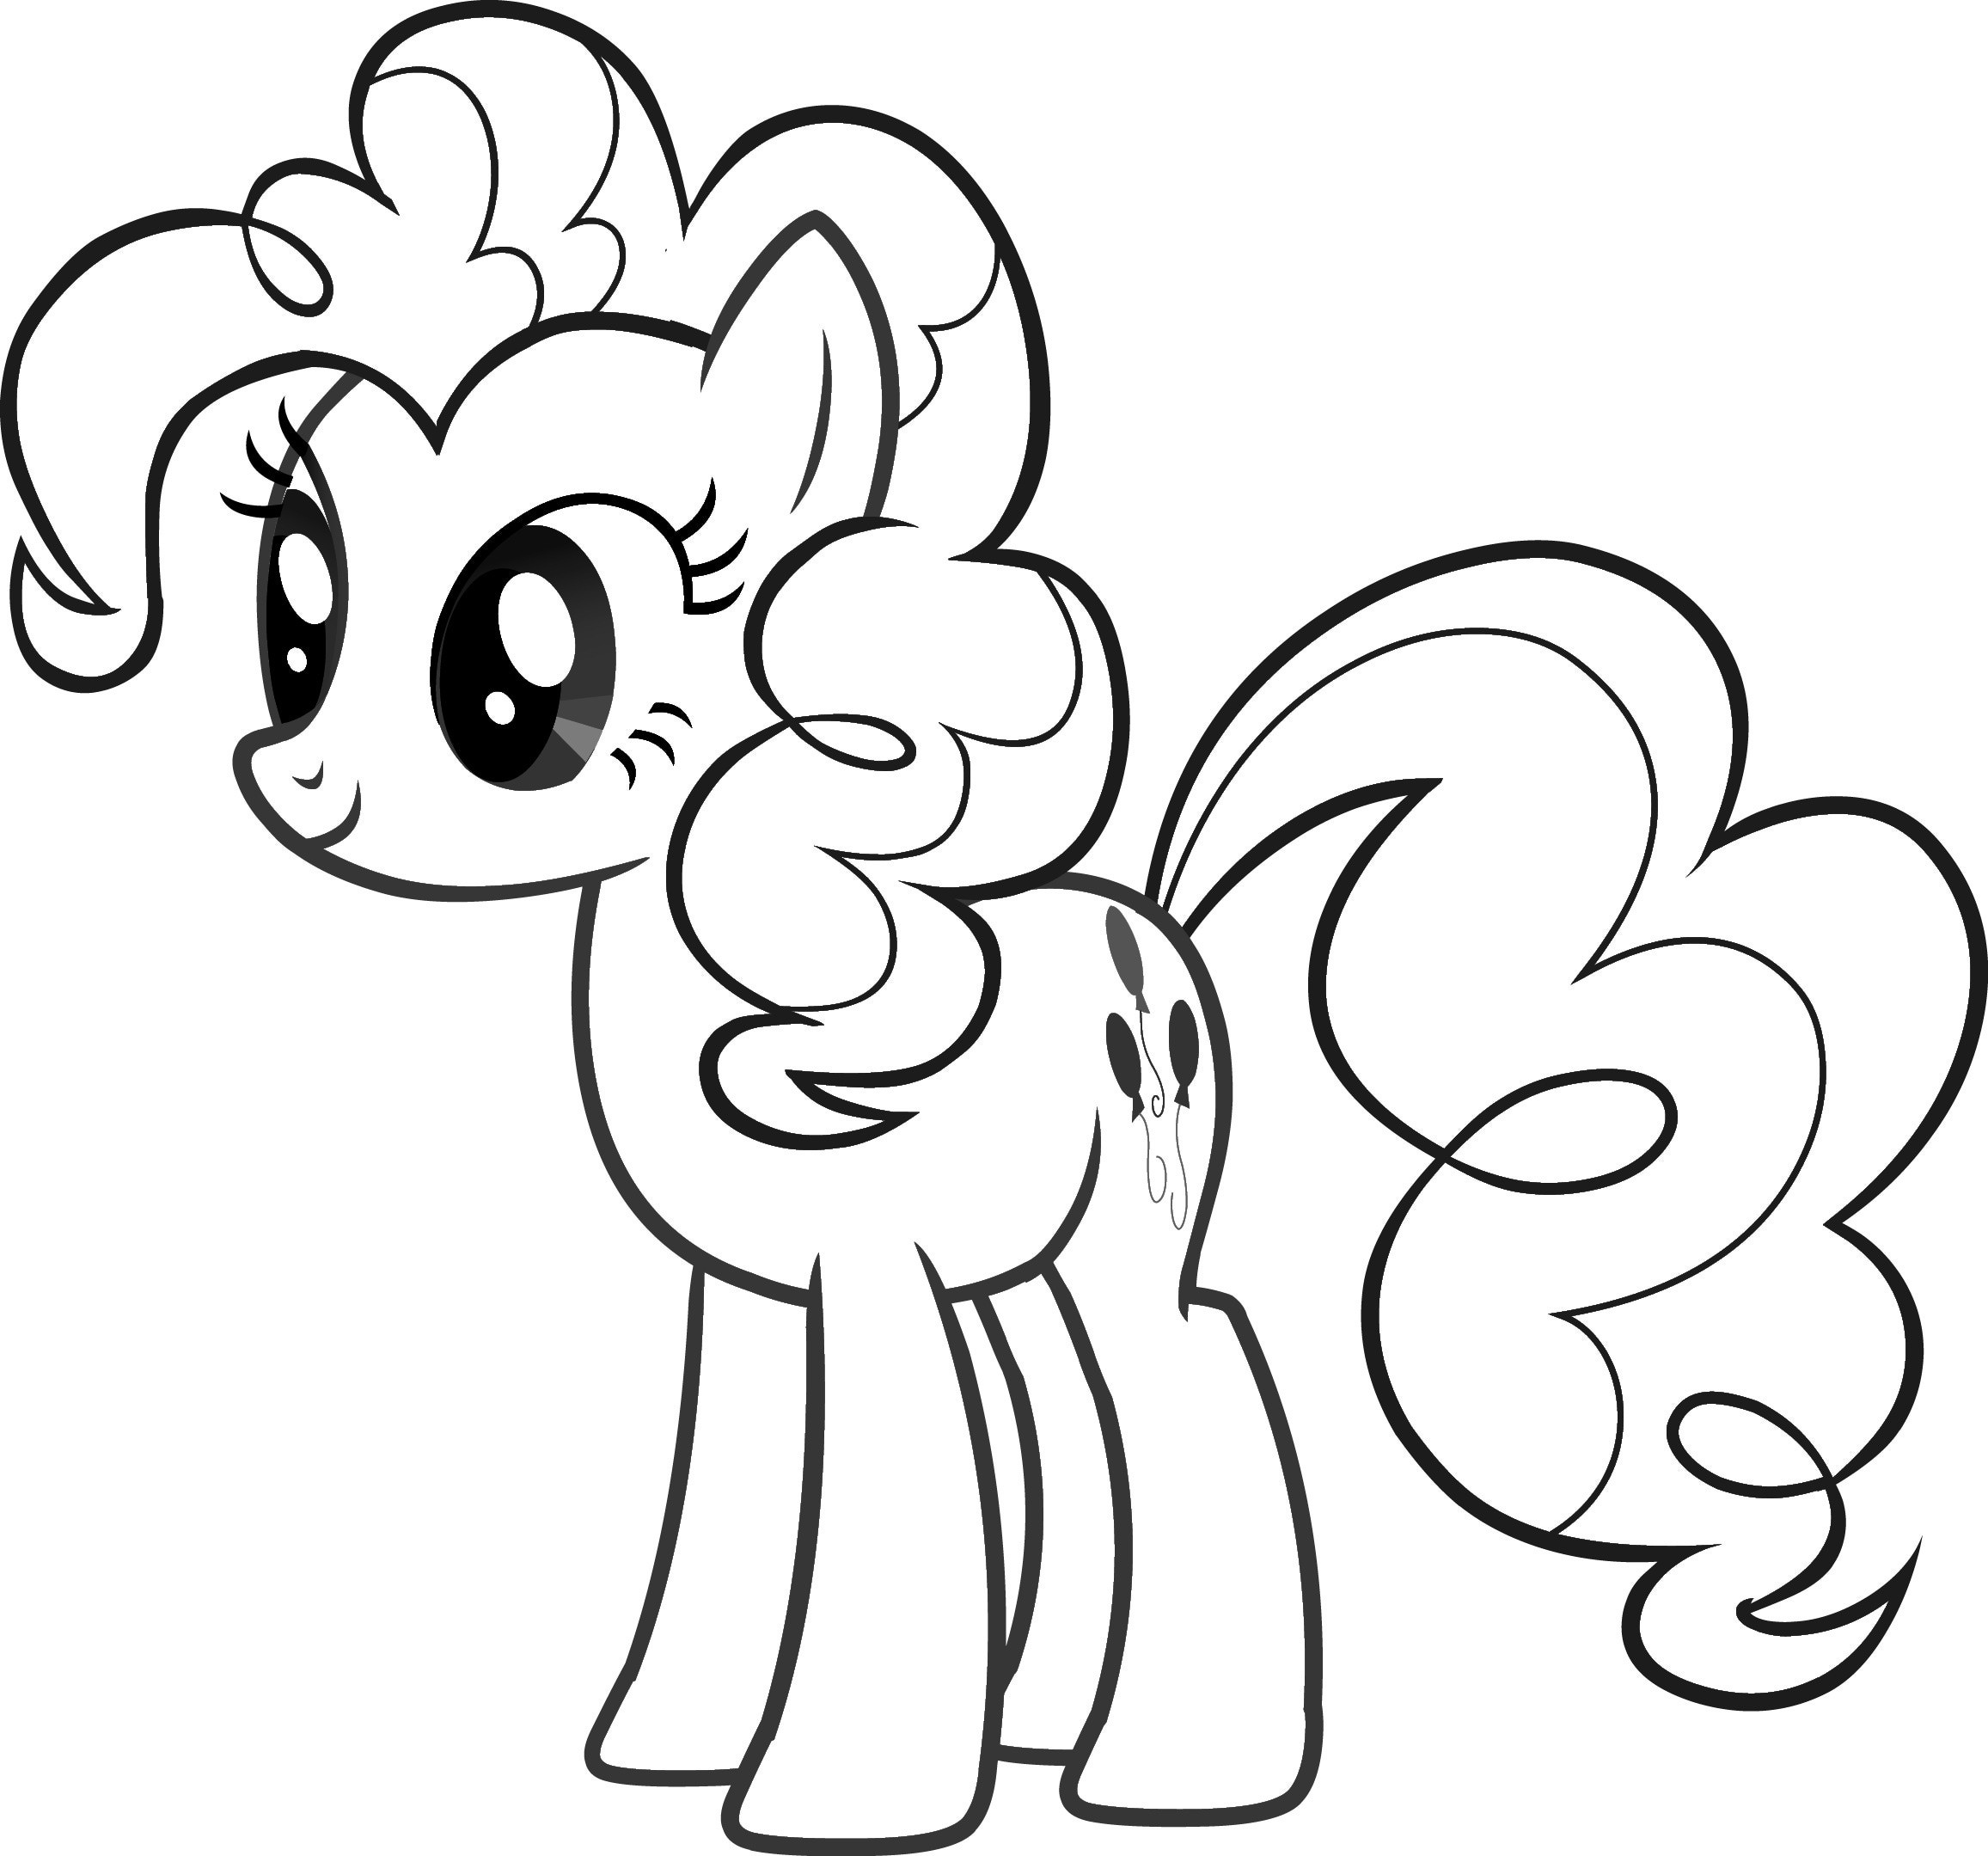 Girls Printable Coloring Pages
 My little pony coloring pages